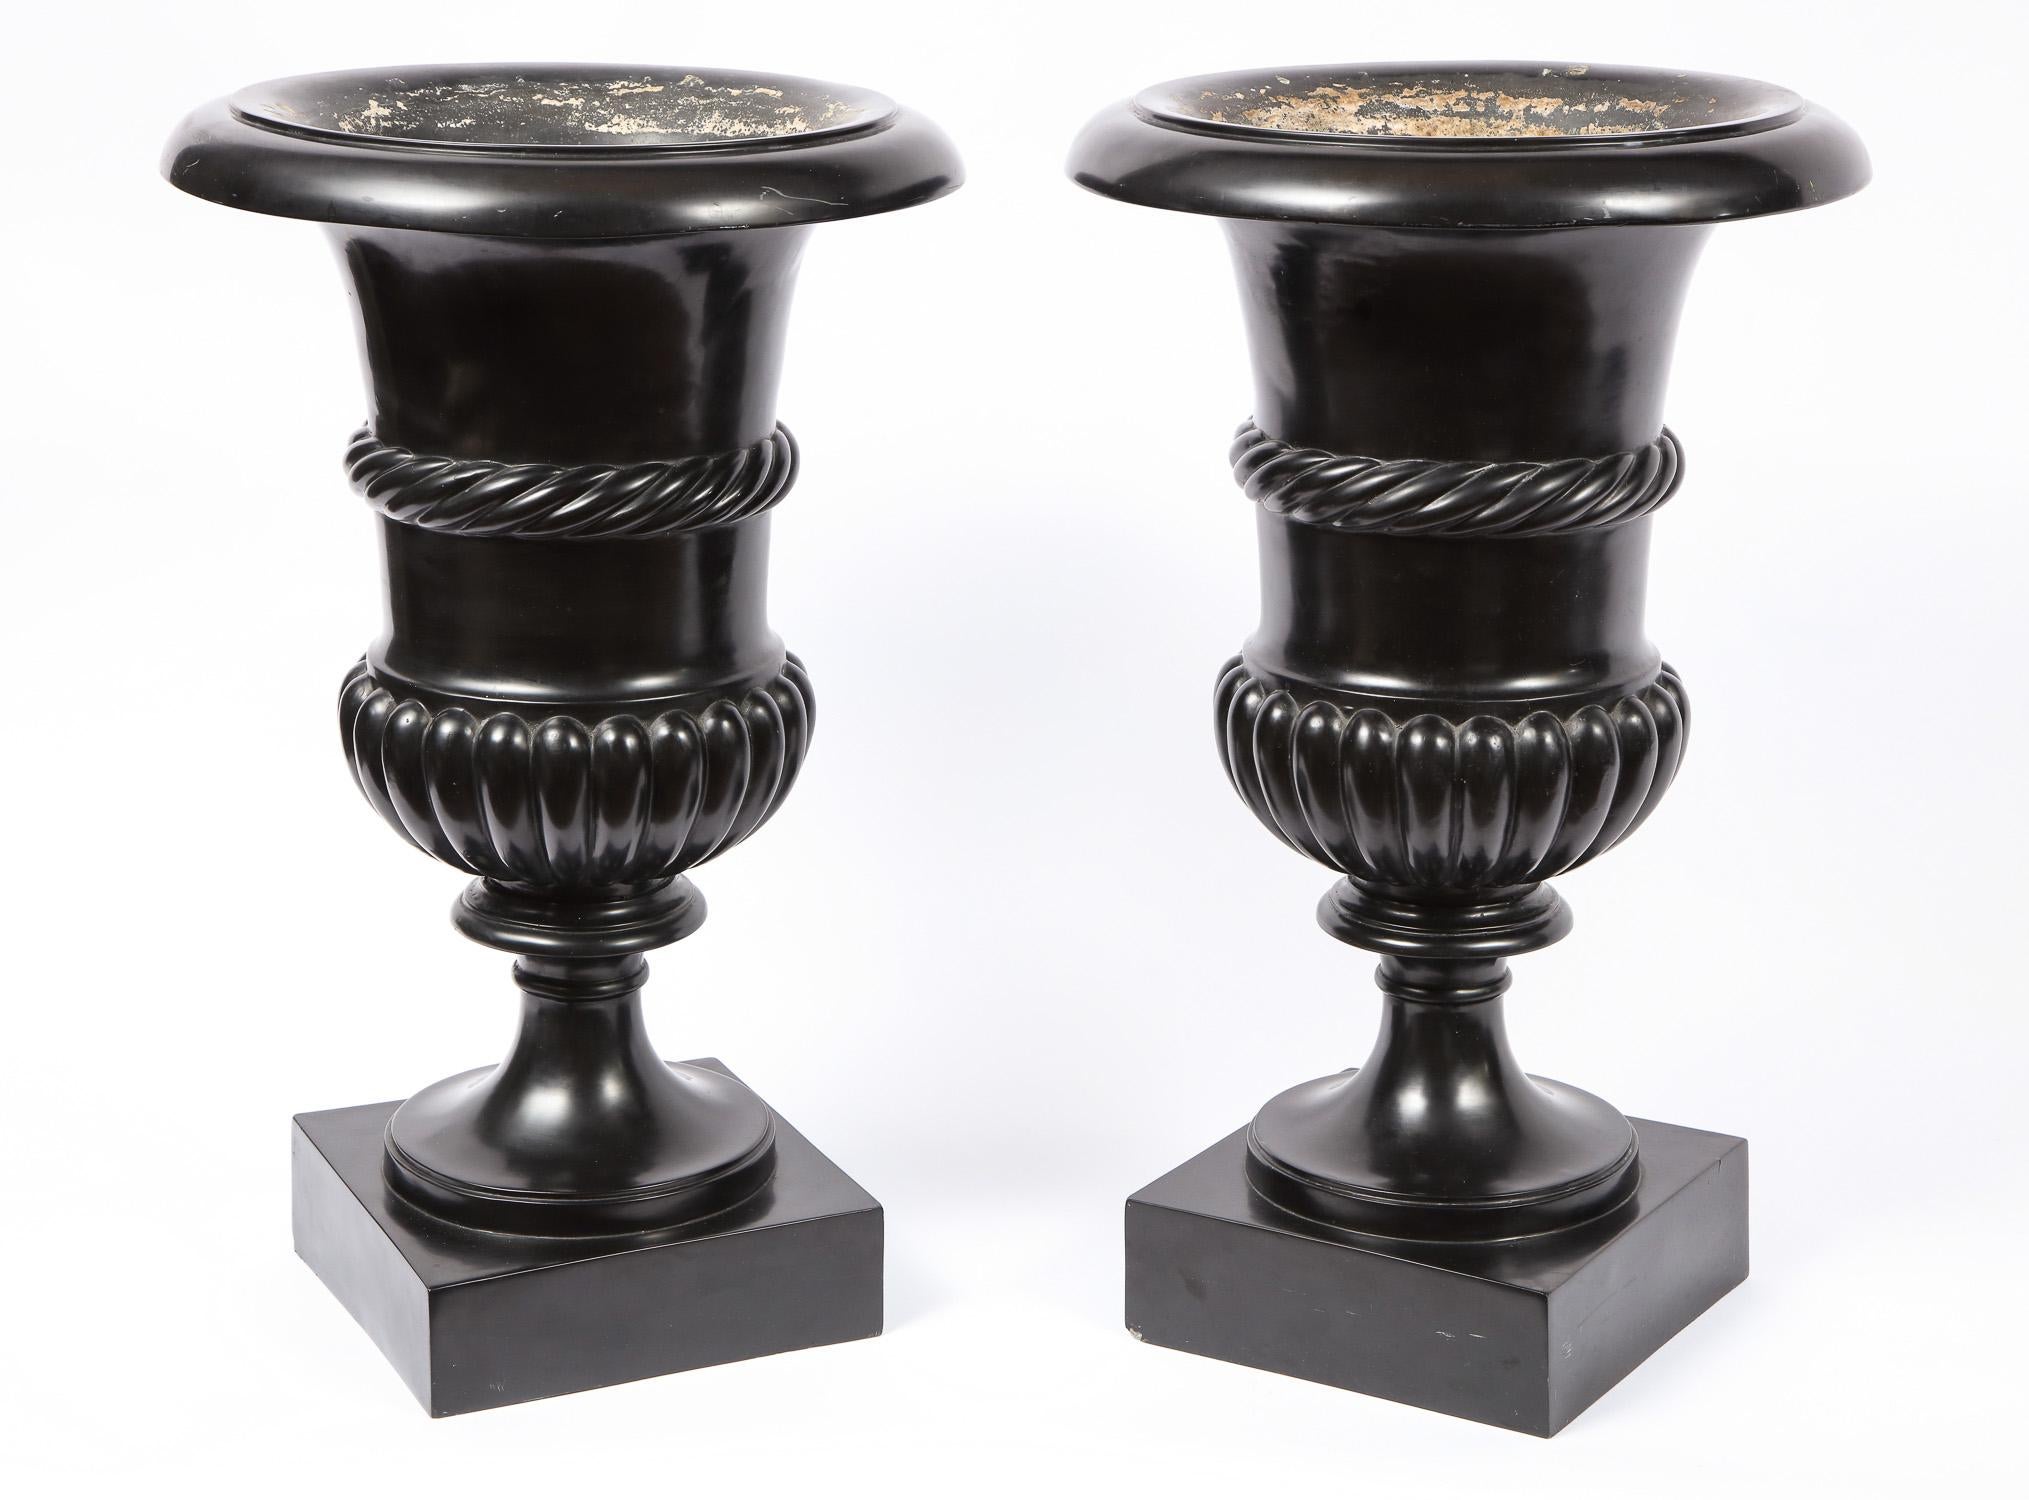 Pair of Antique Roman Neoclassical Campagna Shaped Black Scagliola Vases or Urns For Sale 1